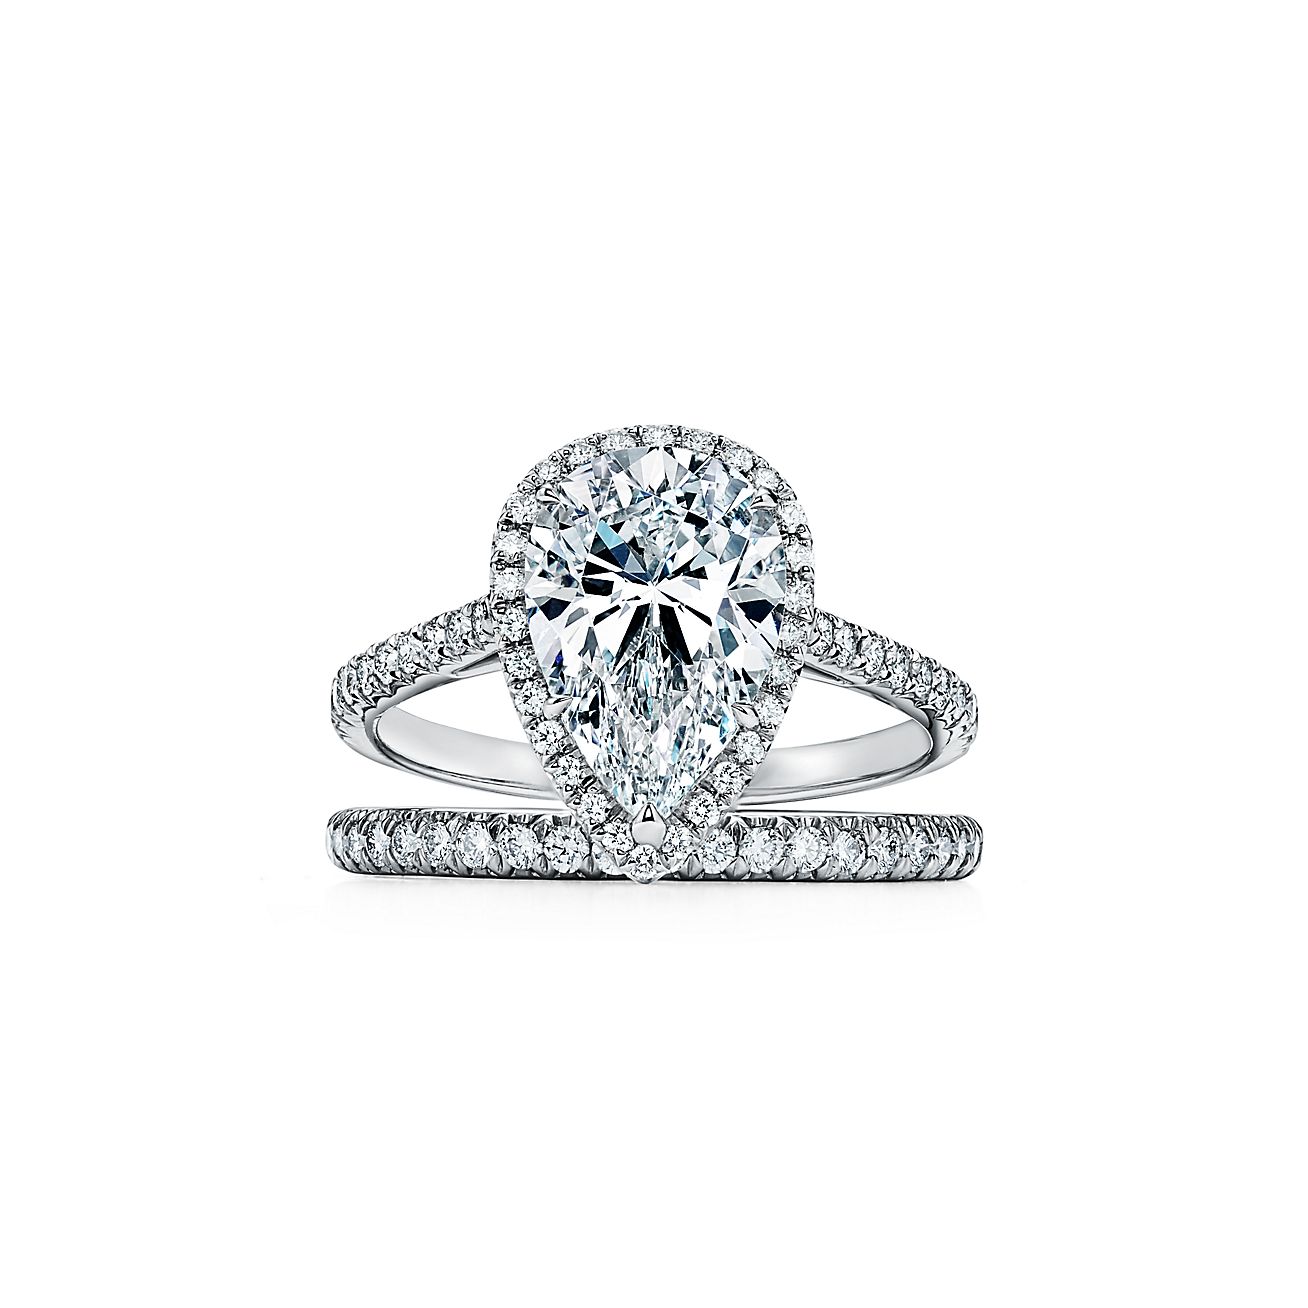 tiffany's pear shaped engagement ring